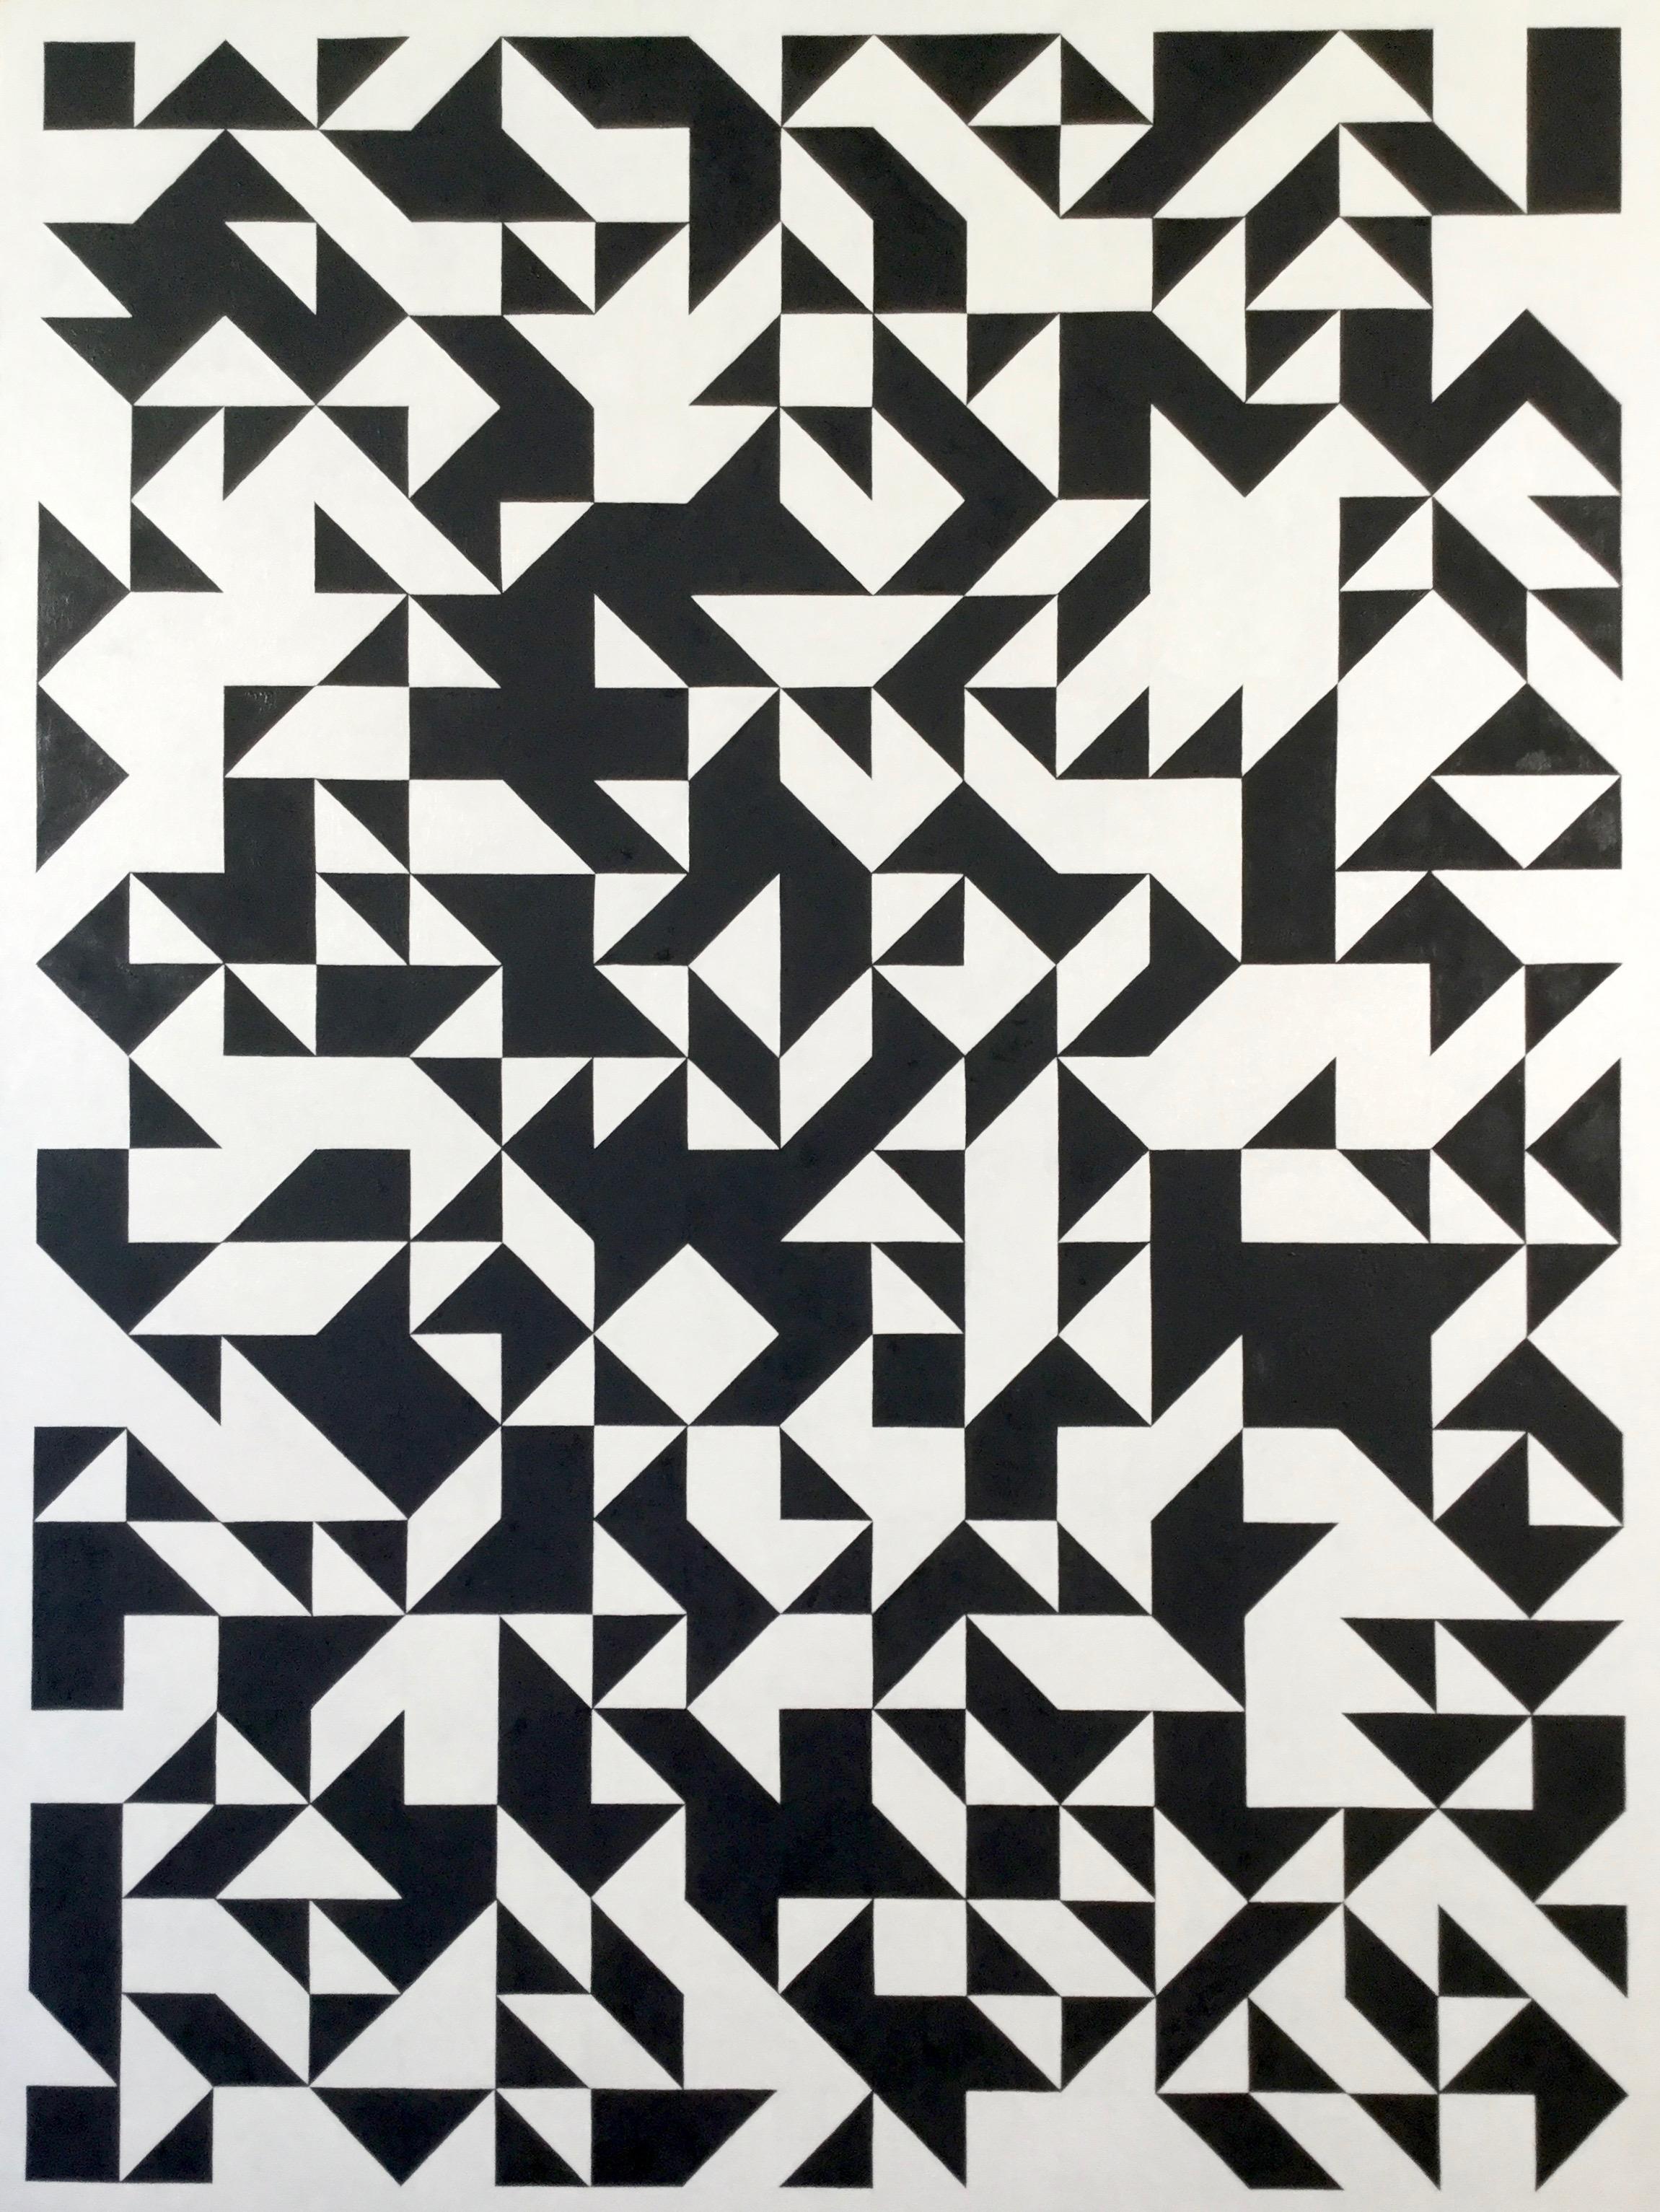 Jon Probert Abstract Painting - Black and White - large oil painting, abstract, constructivist, geometric